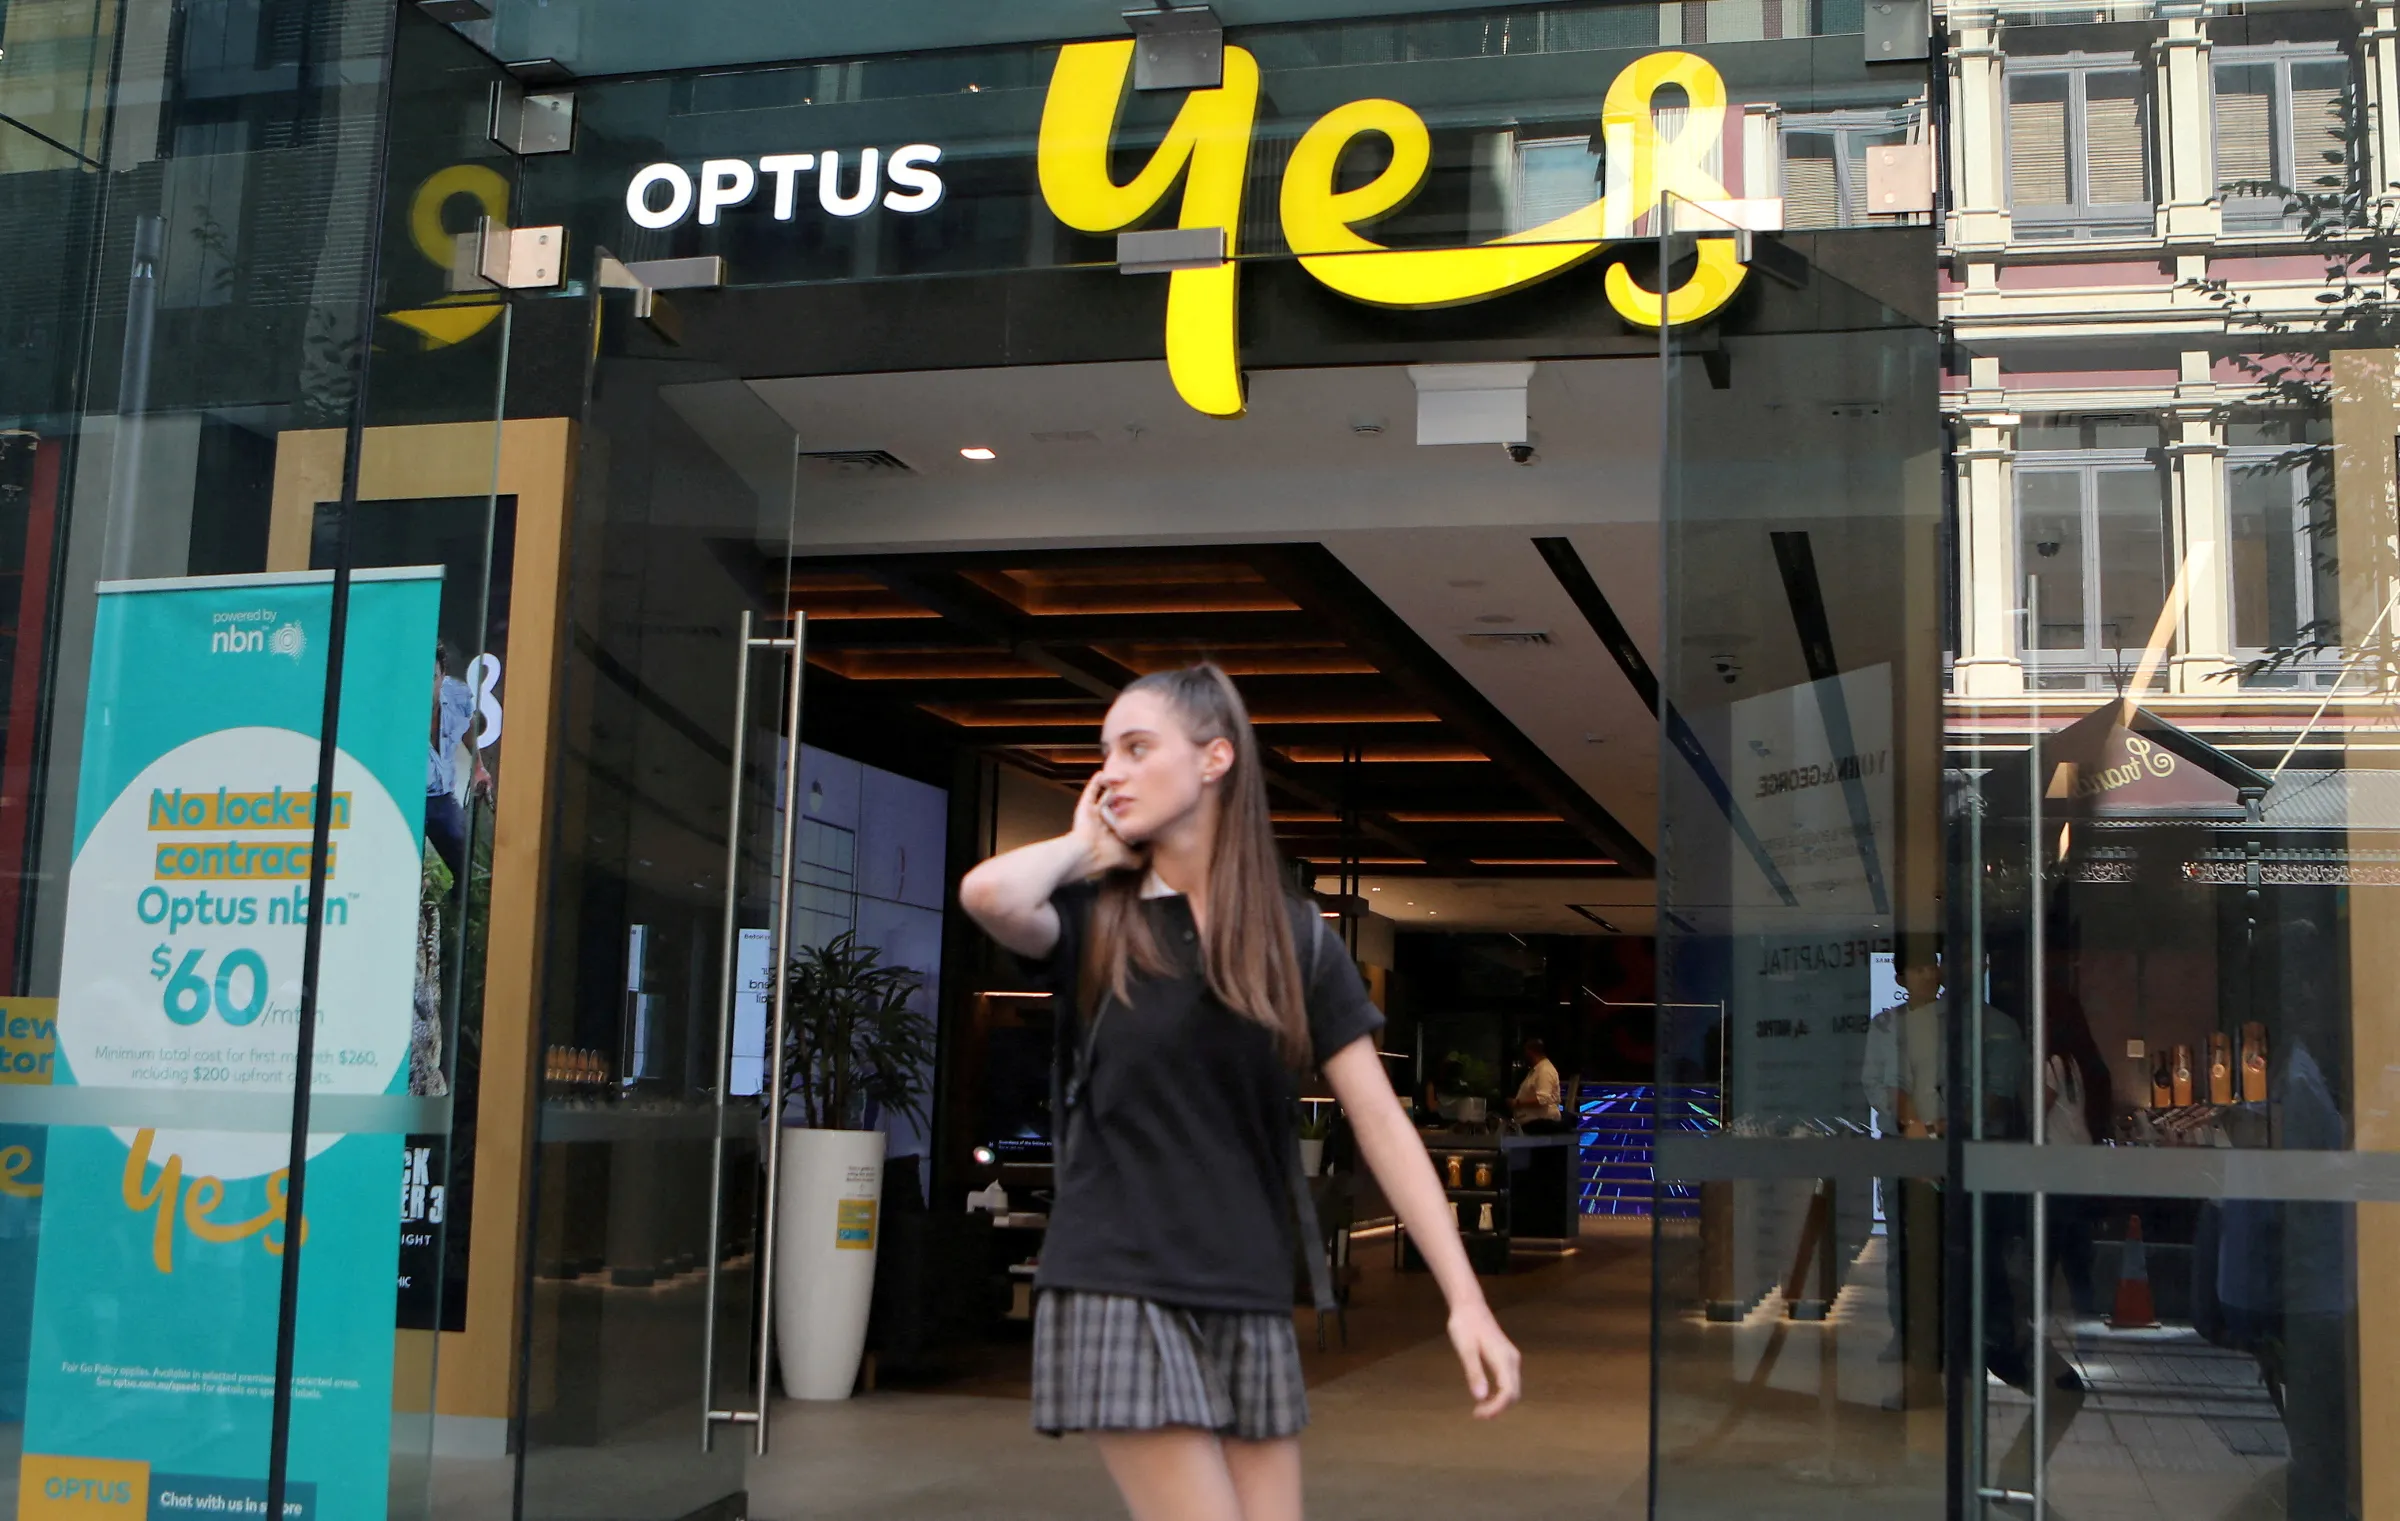 A woman uses her mobile phone as she walks past in front of an Optus shop in Sydney, Australia, February 8, 2018